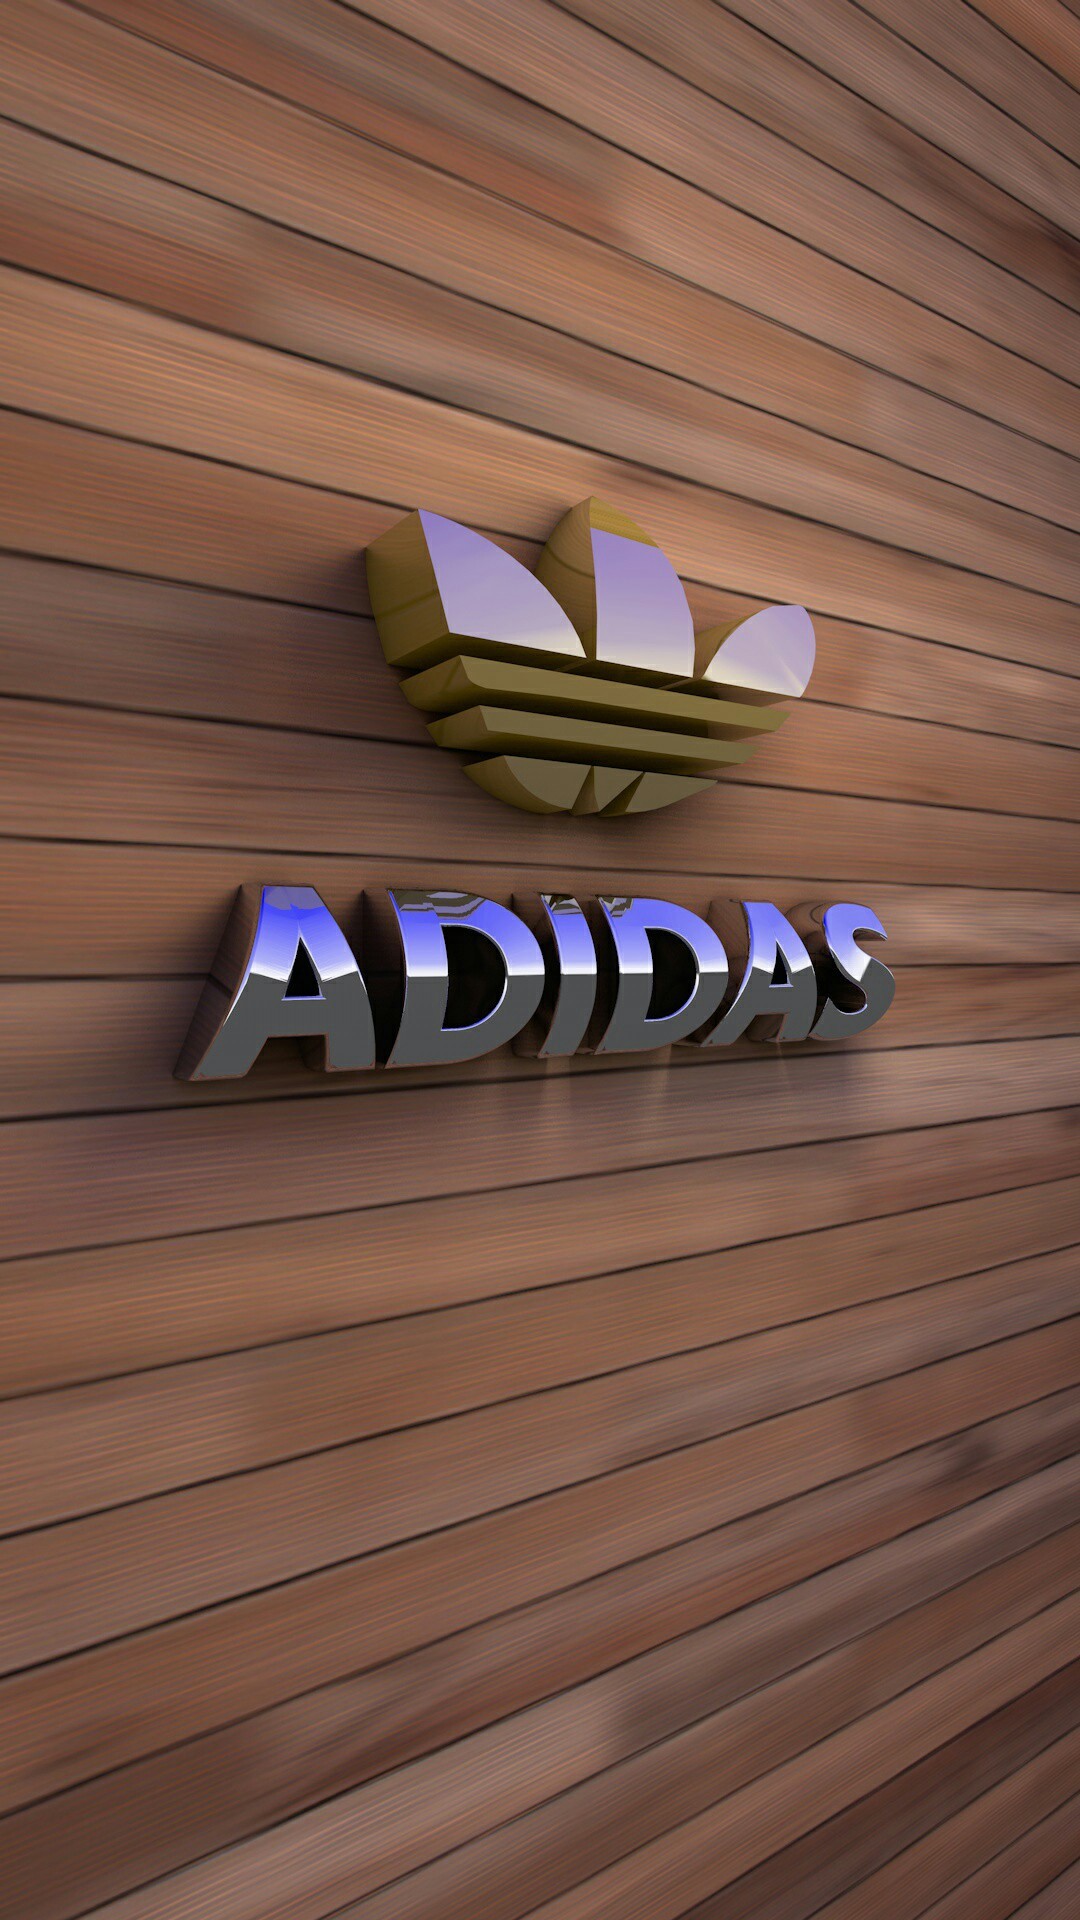 Adidas Wallpaper Brands Other Wallpapers) Hd Wallpapers - Adidas Wallpaper Hd - HD Wallpaper 